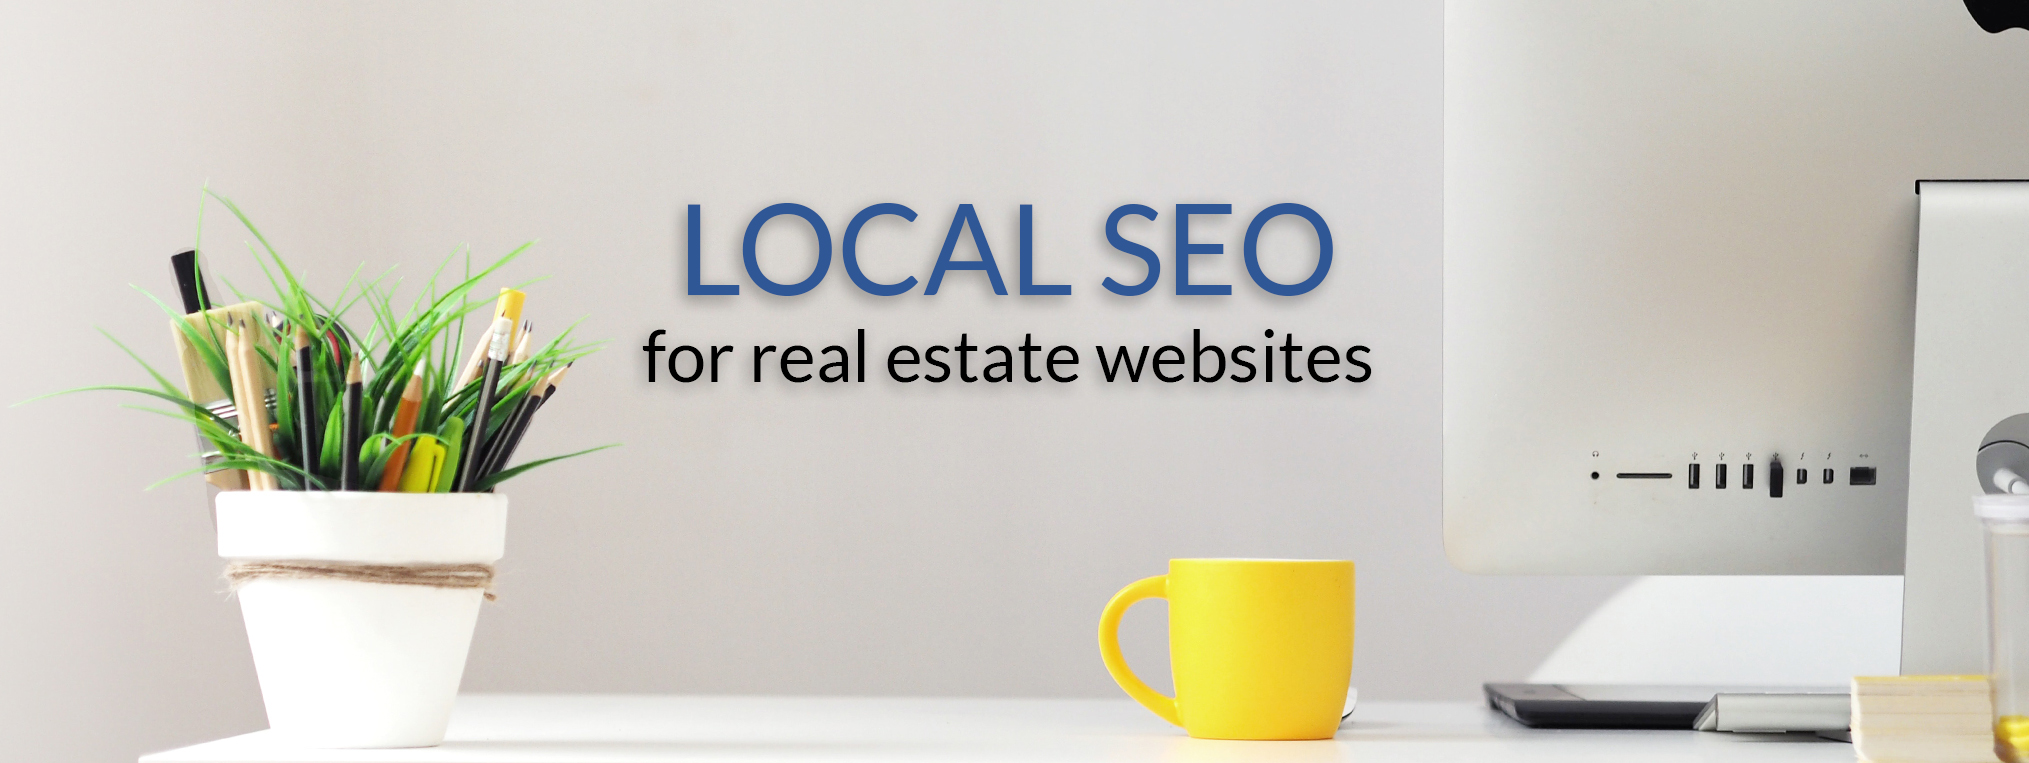 5 Essential Real Estate SEO Tips and Strategies for 2019